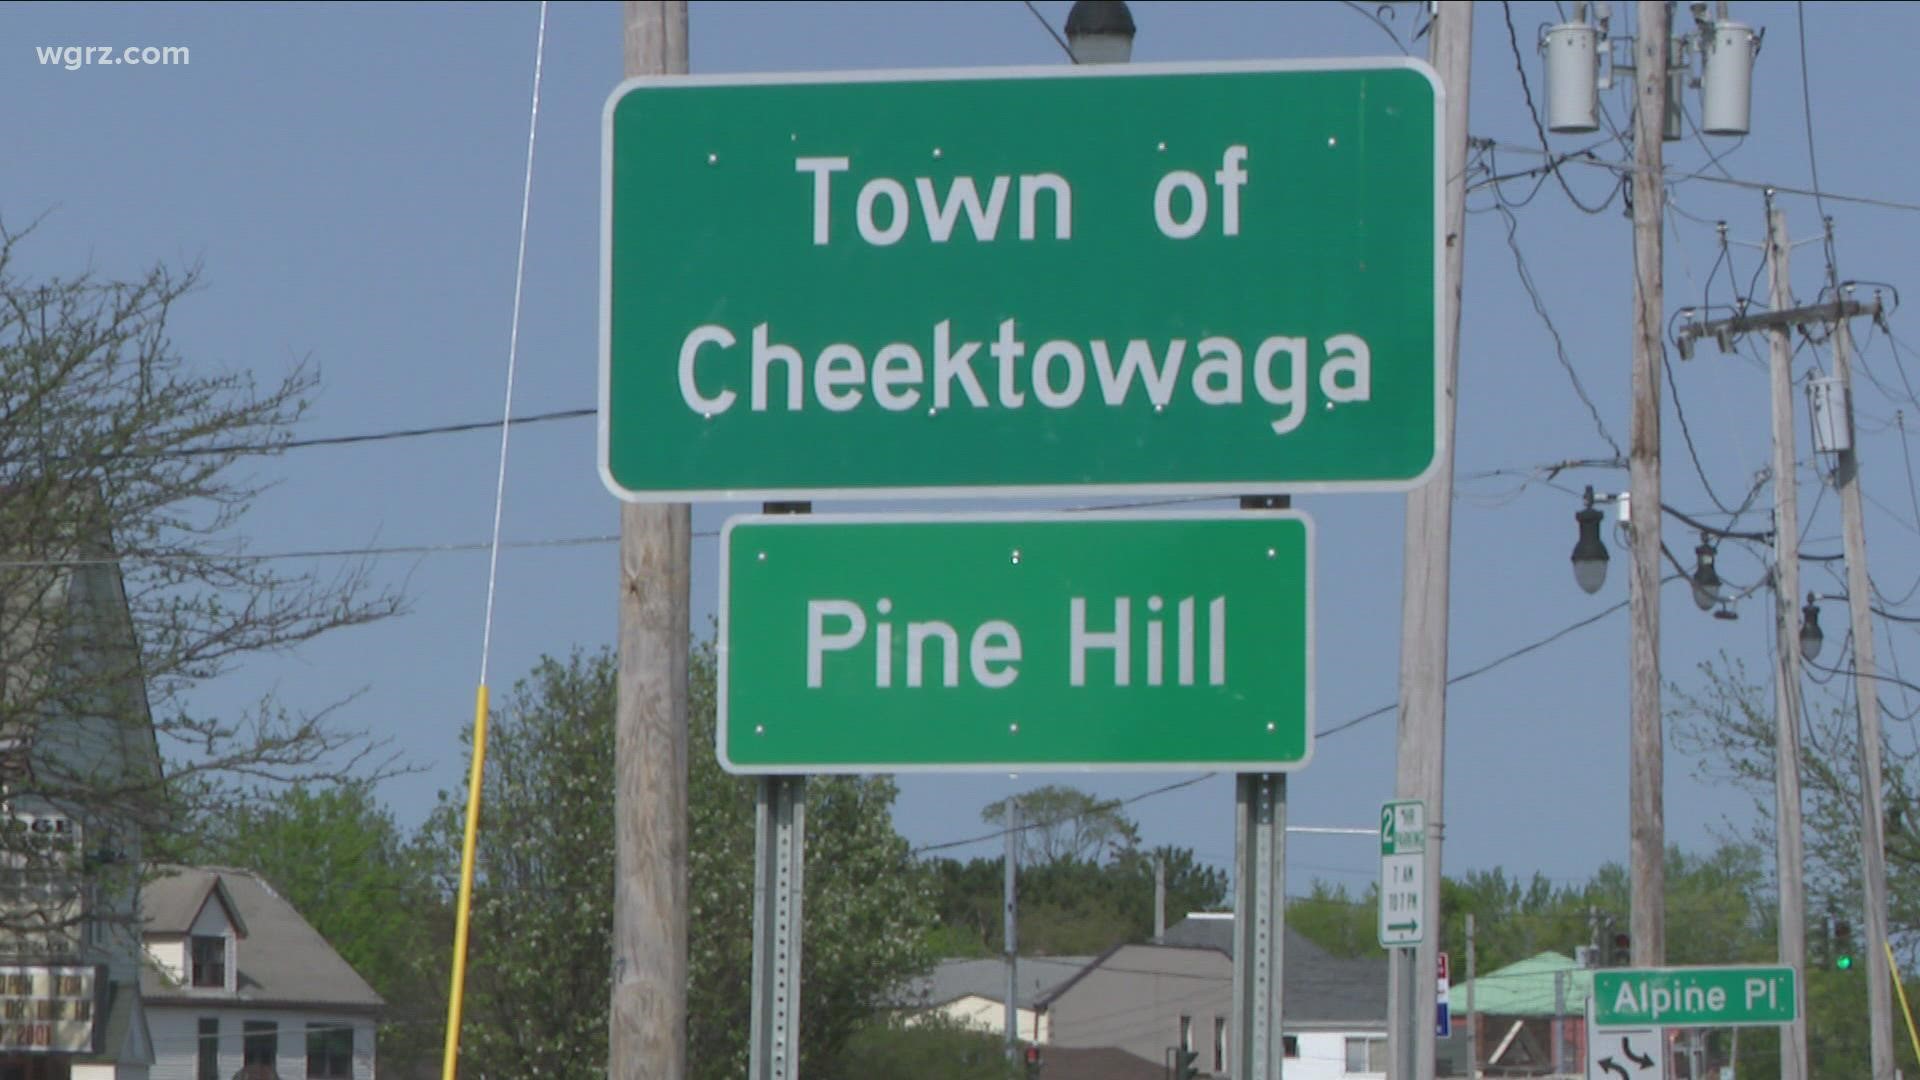 The city of Tonawanda, North Tonawanda and Cheektowaga are not observing Juneteenth. it's a matter that will be considered in contract negotiations,